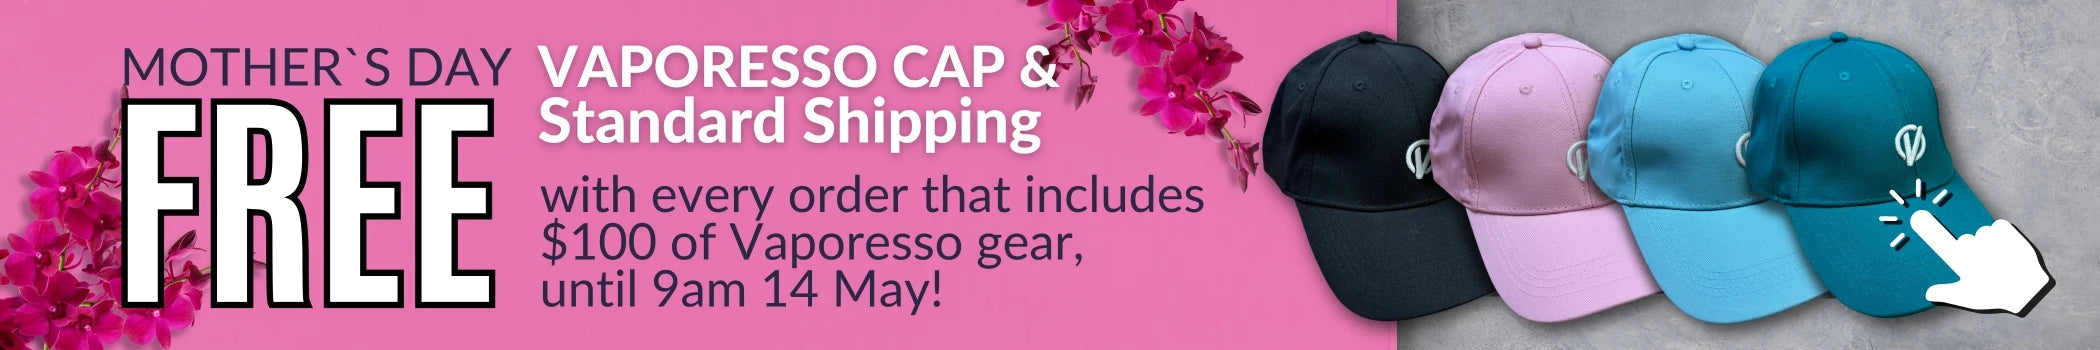 Free cap when you spend $100 or more on Vaporesso products this mothers day. Plus Free Shipping.